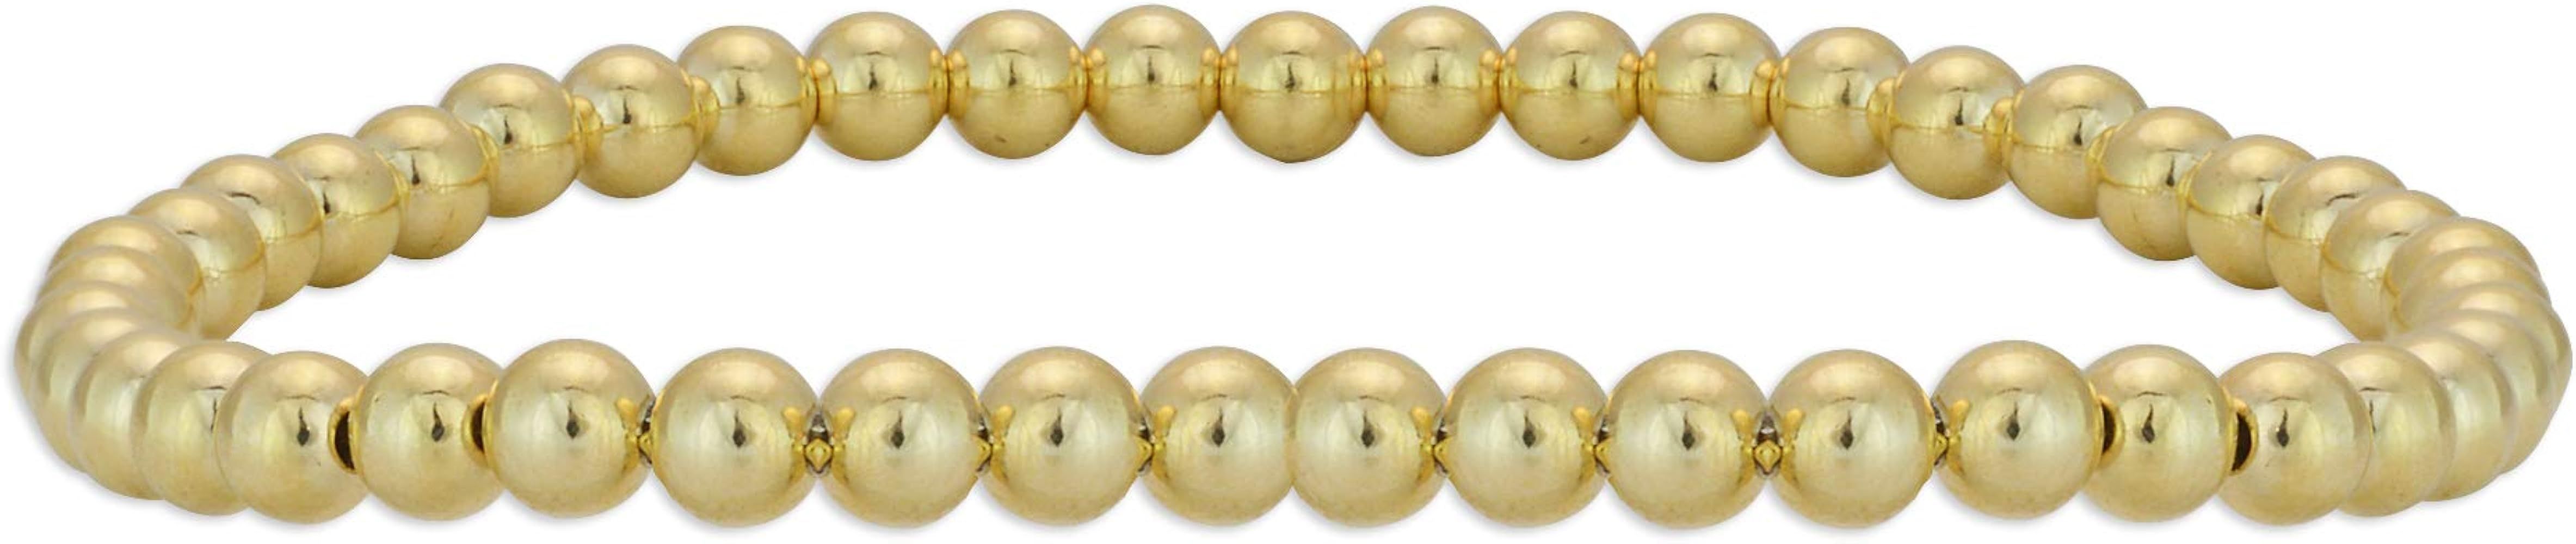 14kt Gold Filled Bracelet, 4mm Beads, Stretch and Stackable, Hand Made in USA | Amazon (US)